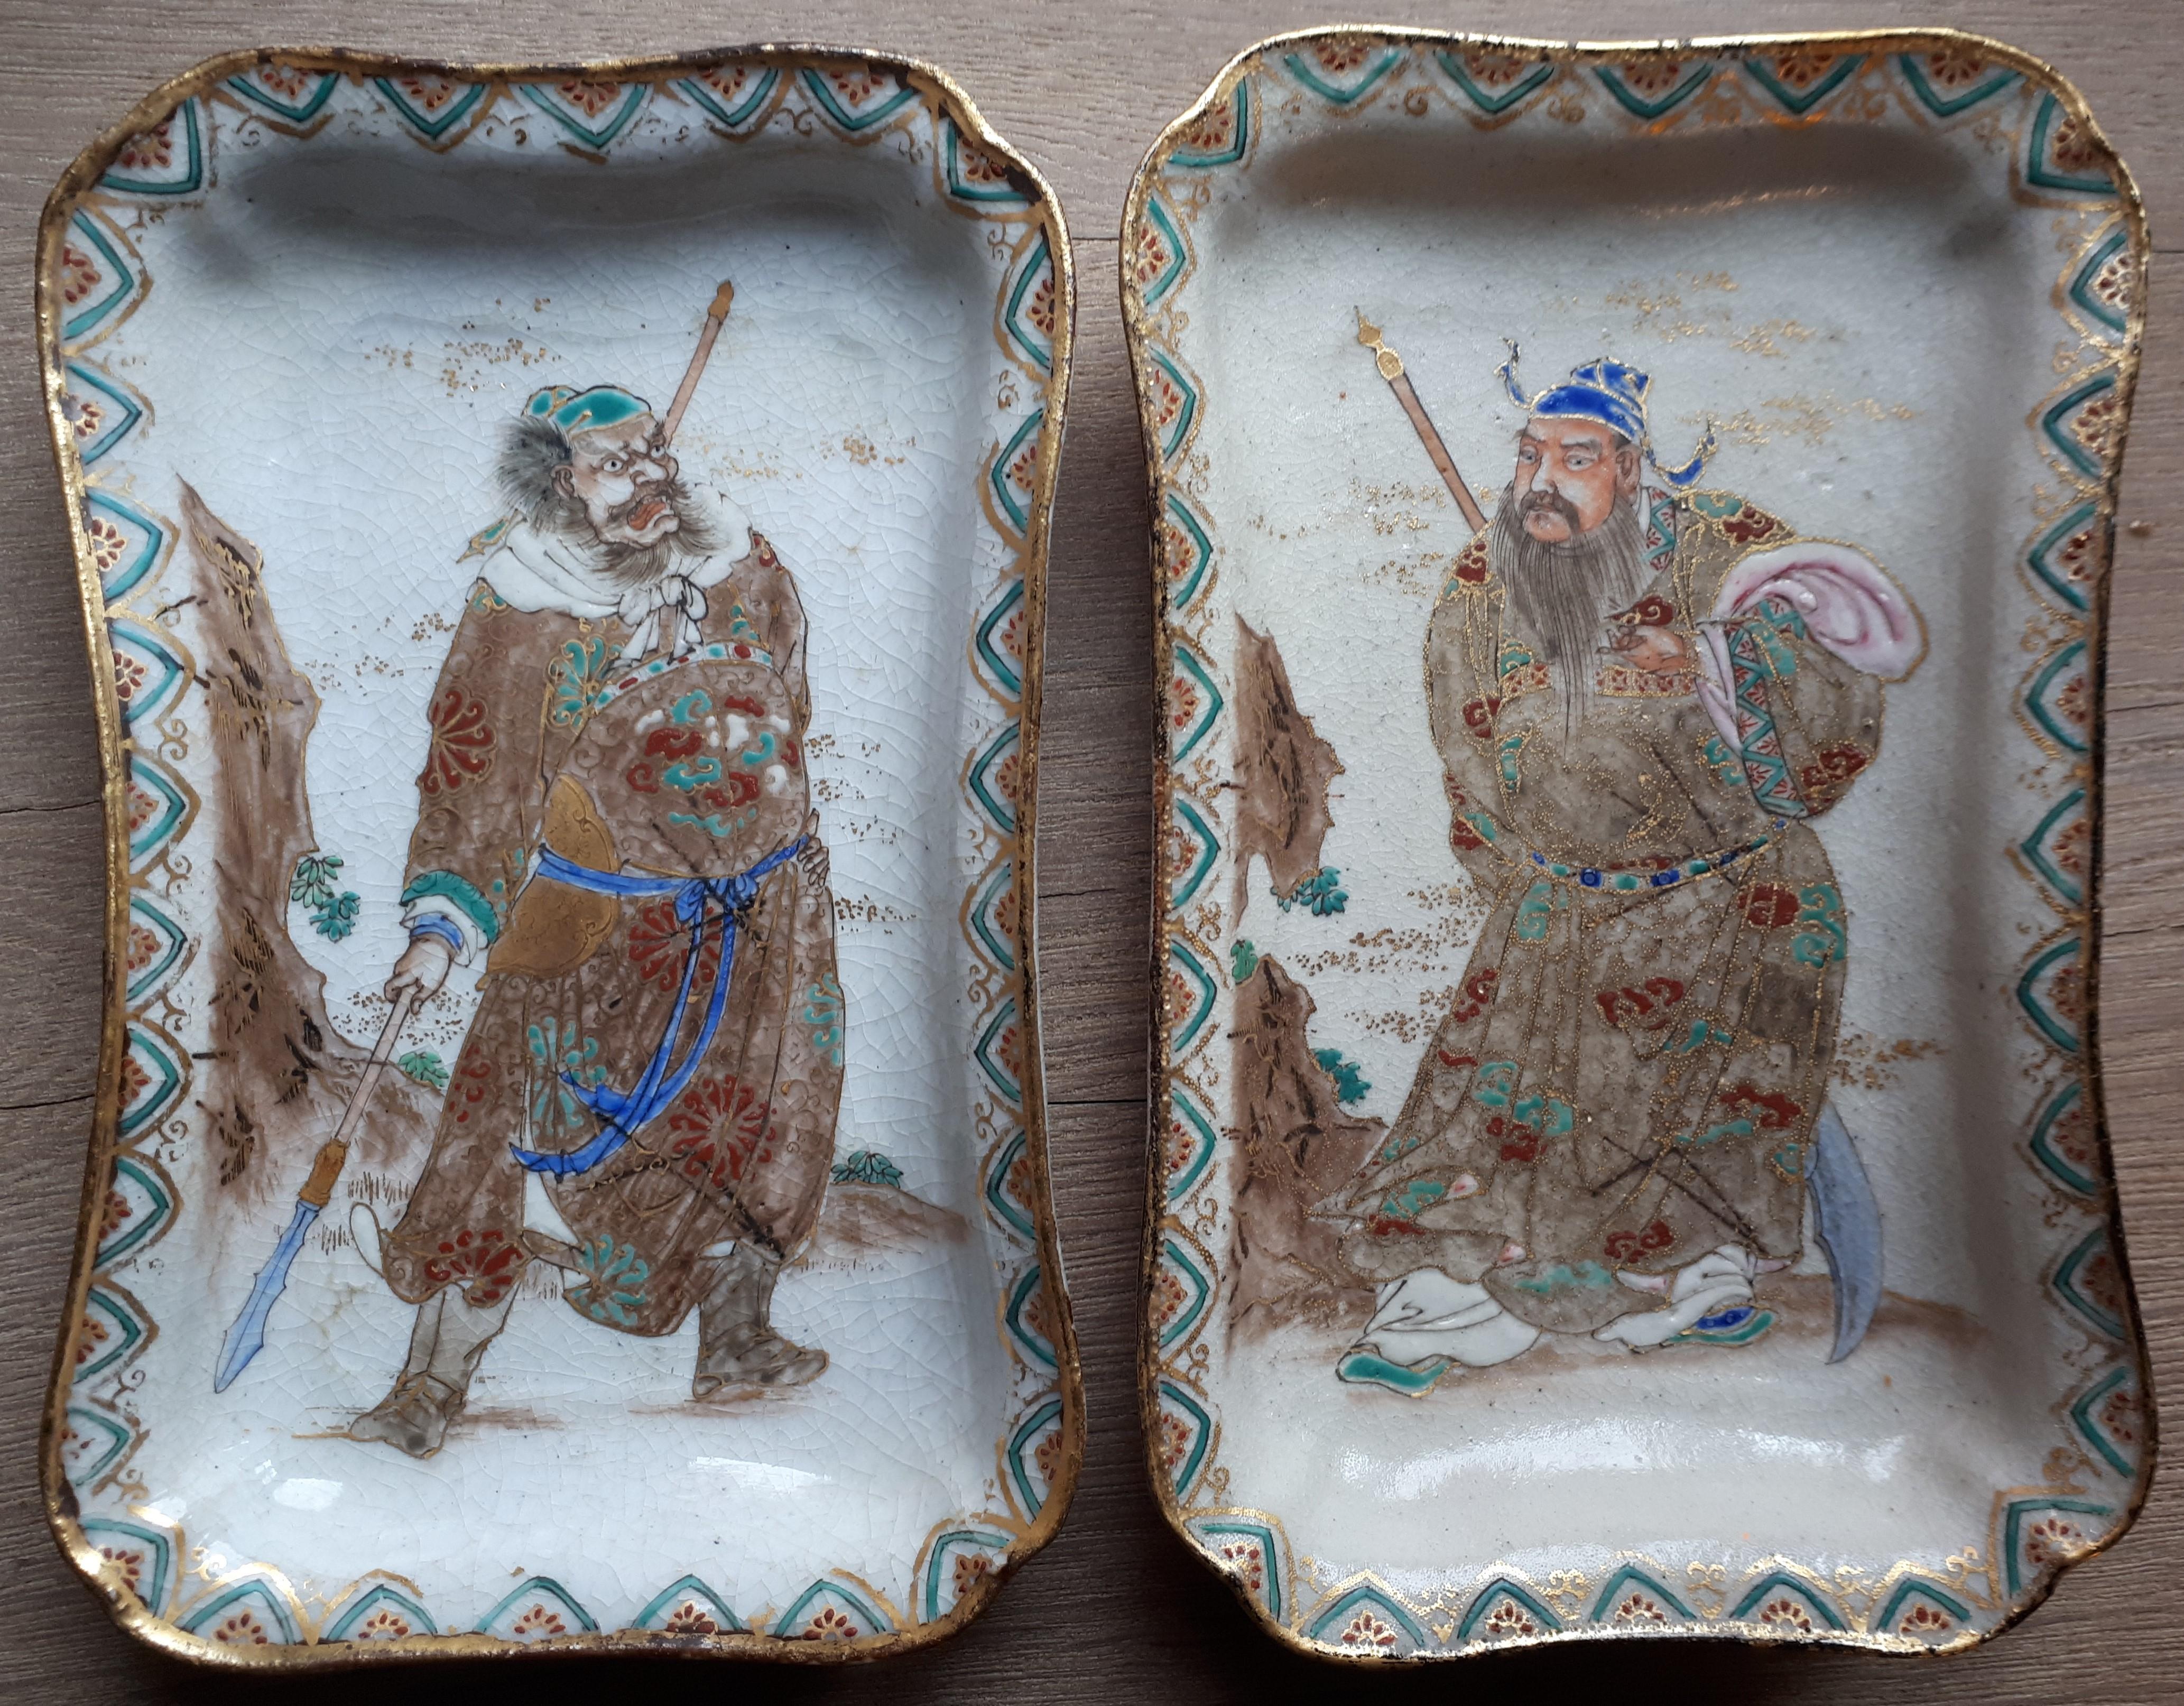 Pair of Satsuma earthenware dishes decorated with warriors.
Japan, second half of the 19th century.